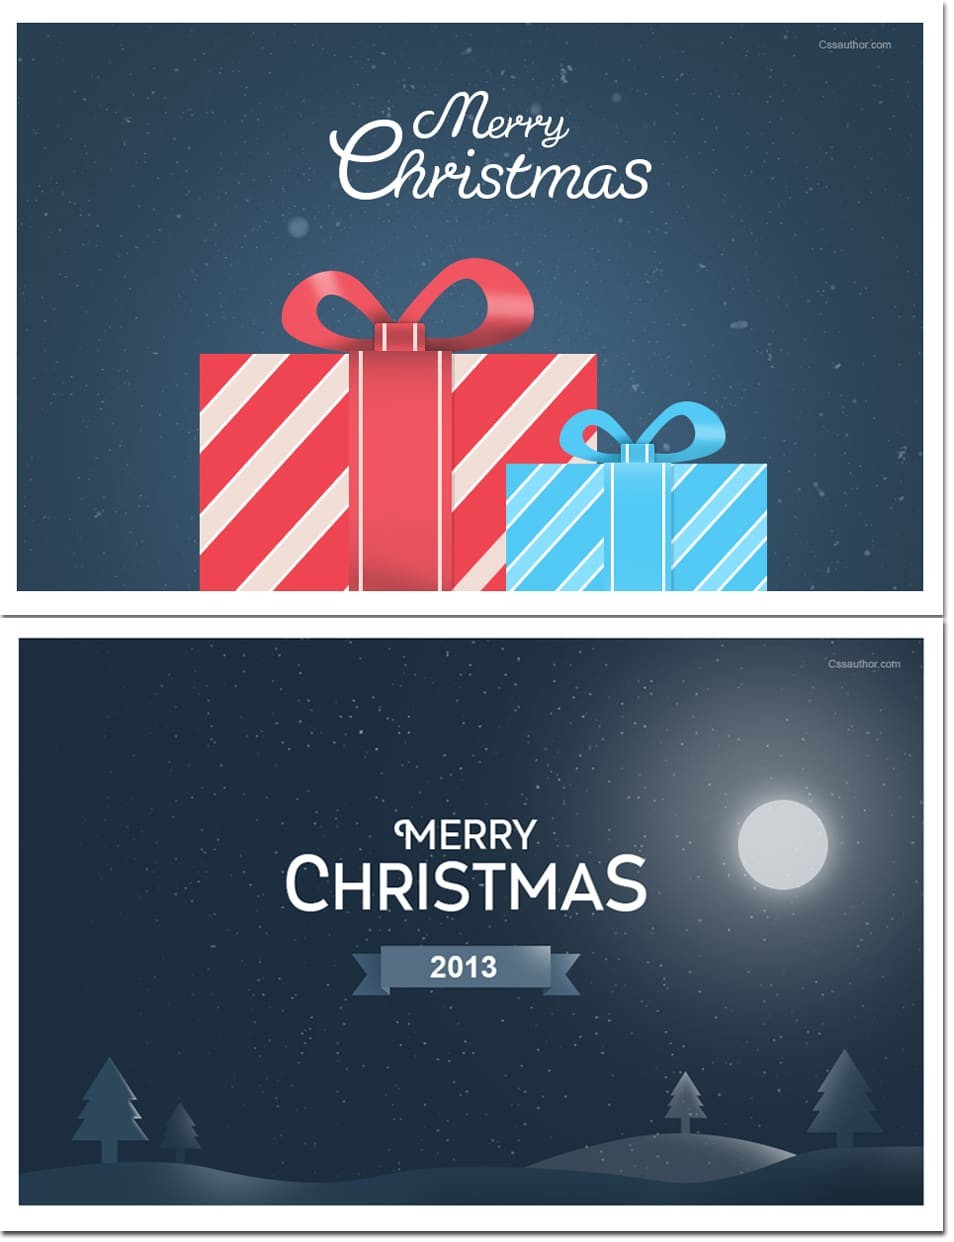 Free Christmas Greeting Cards Icons Decorative Elements Card Psd